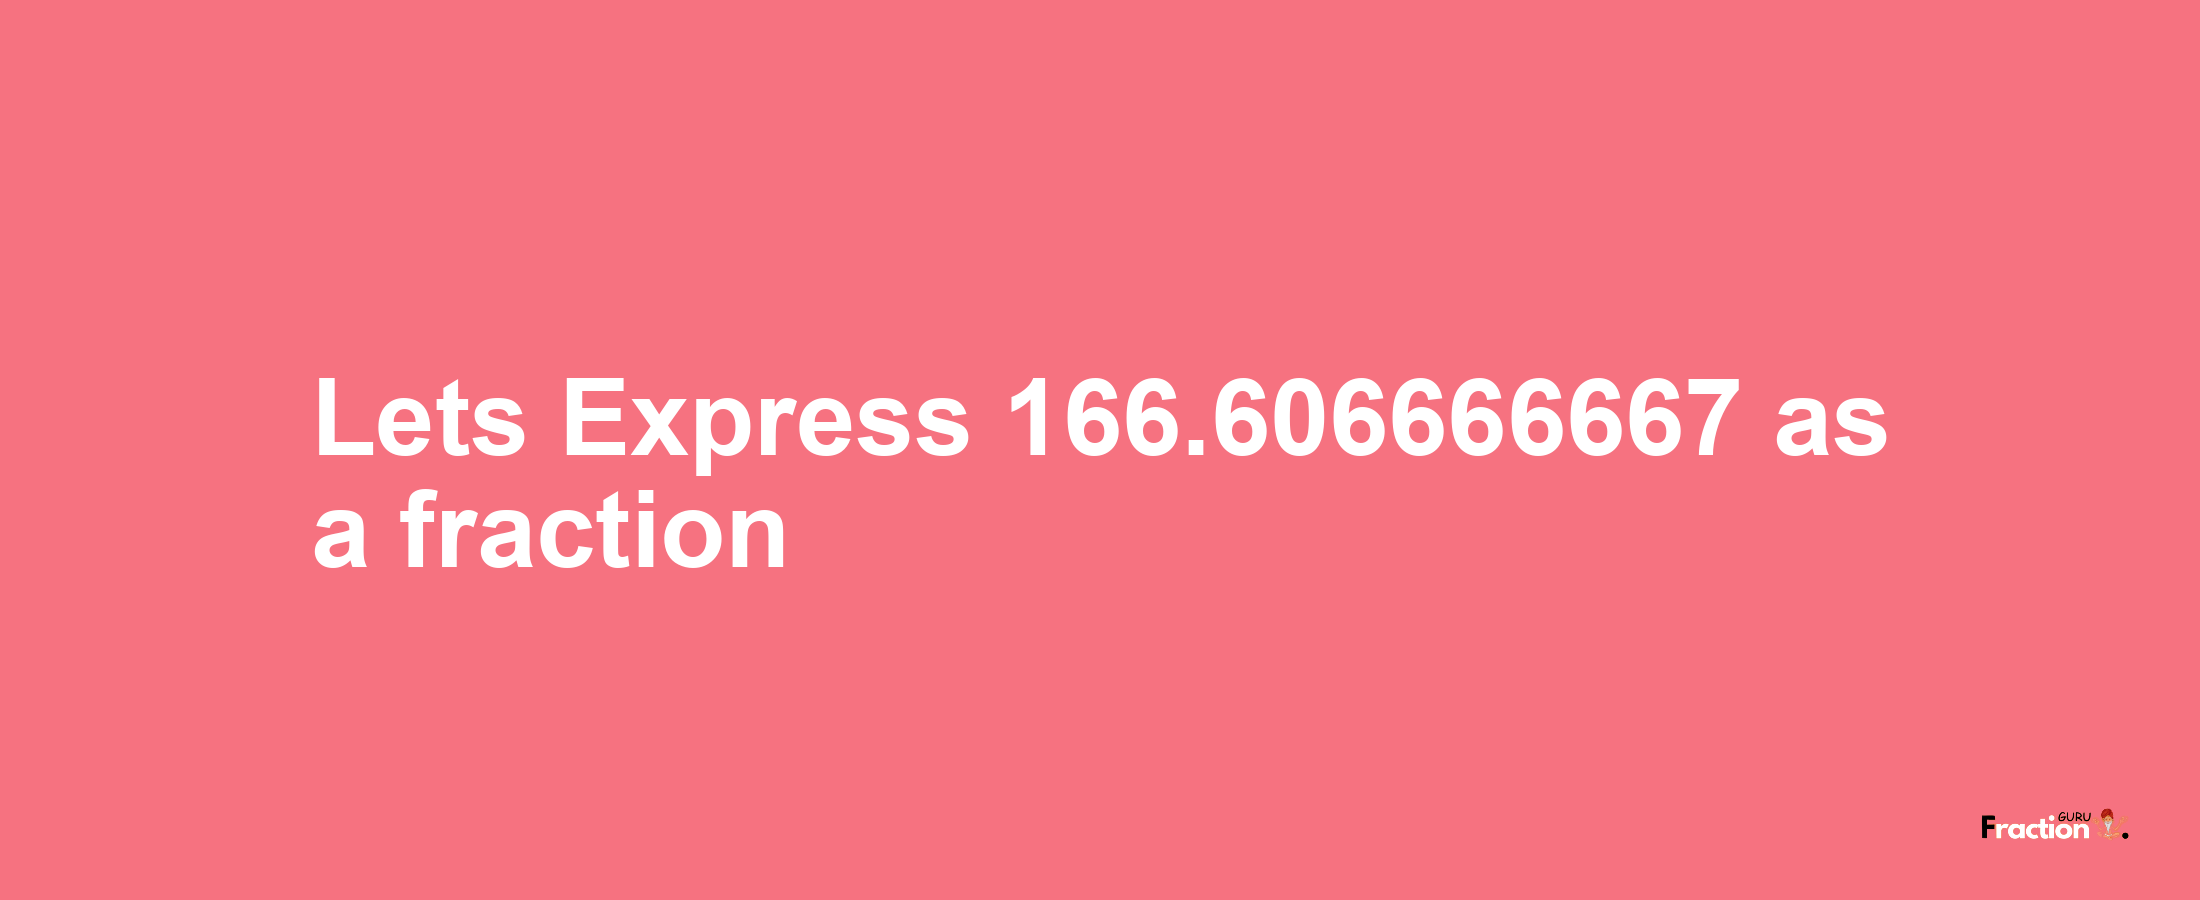 Lets Express 166.606666667 as afraction